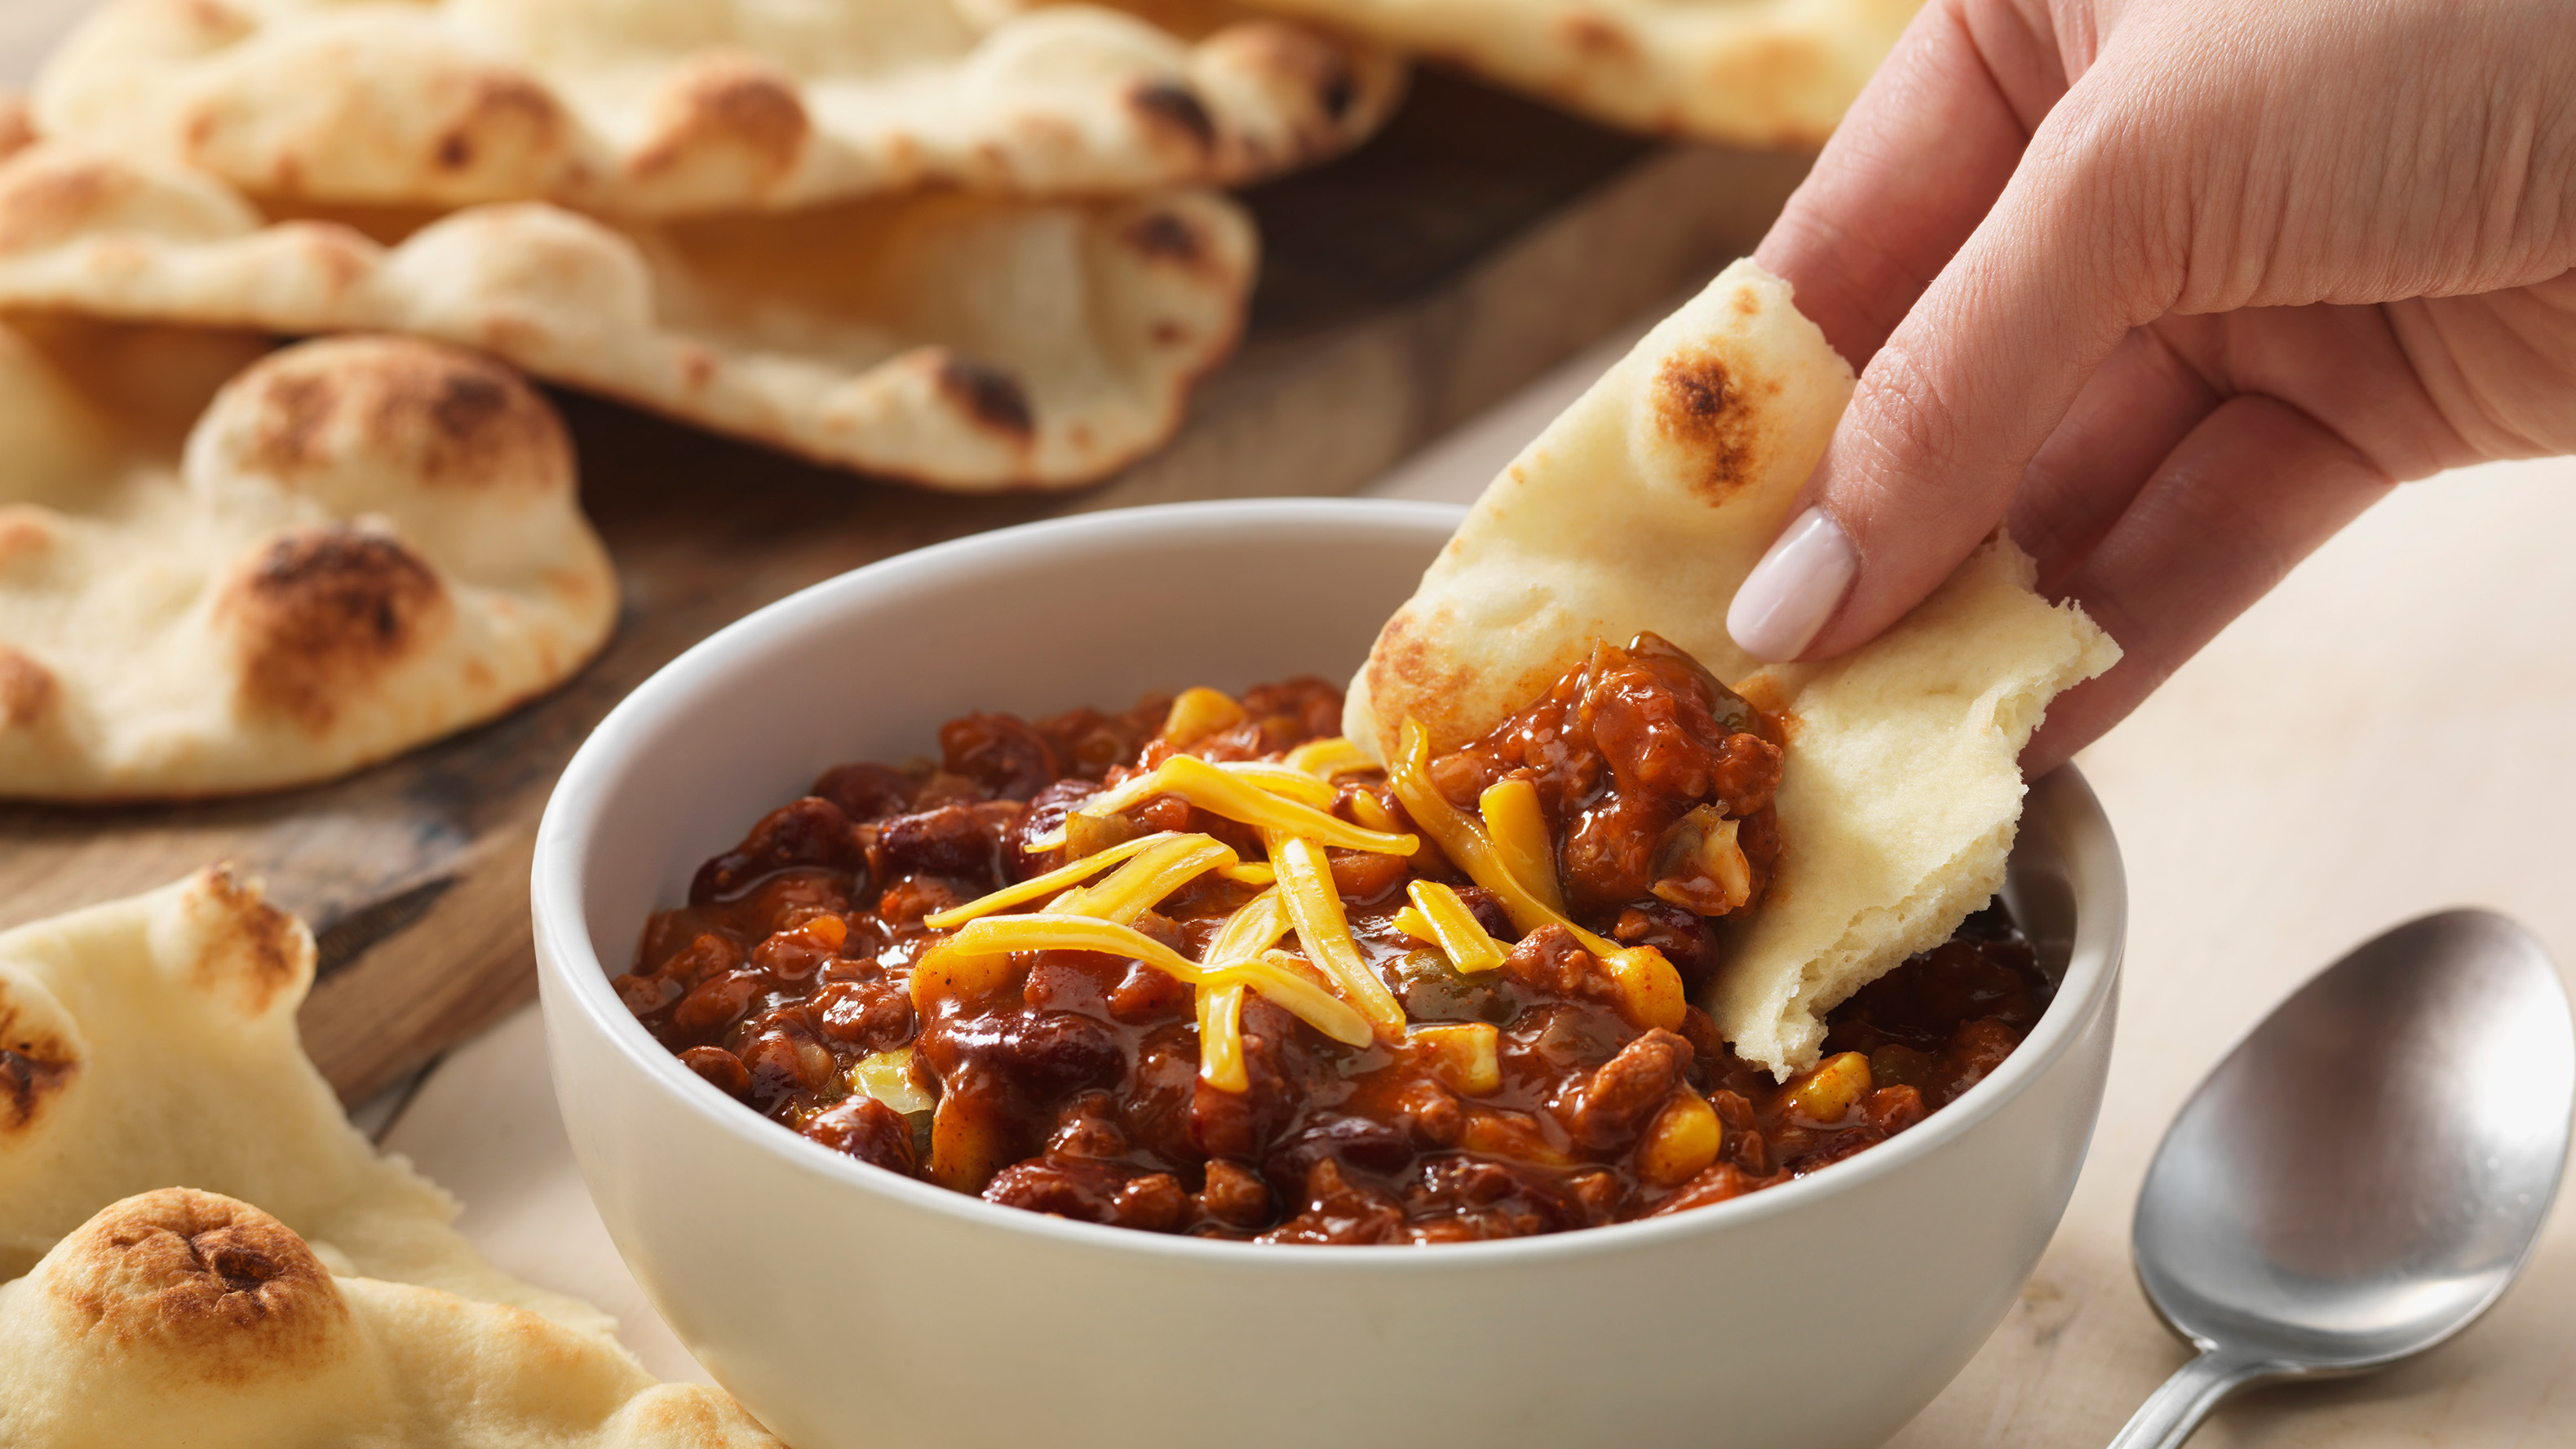 Easy simple and quick chili bowl with naan for dipping